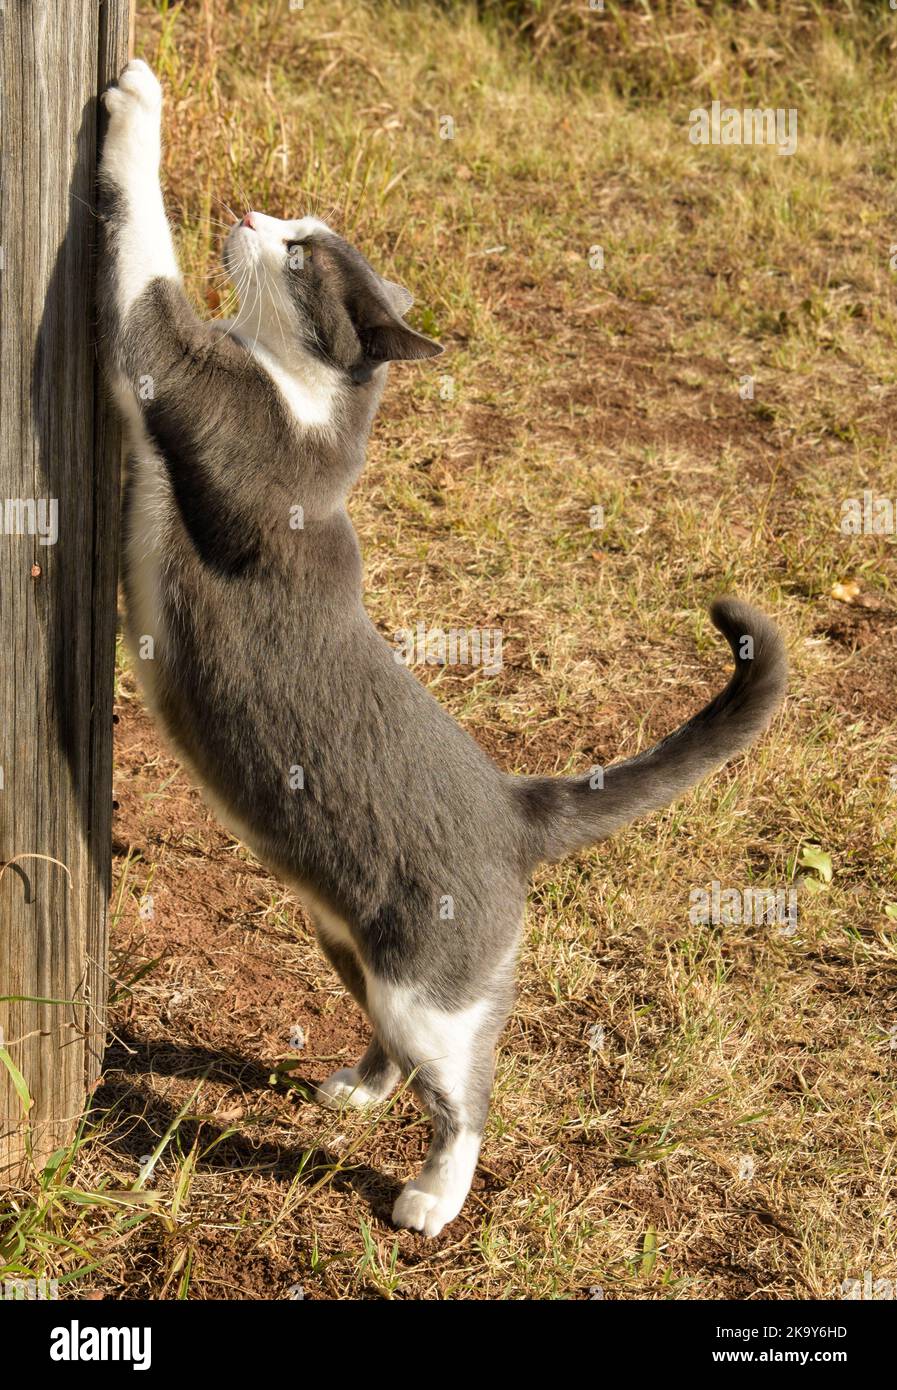 Gray and white spotted cat sharpening her claws on a wooden structure outdoors Stock Photo